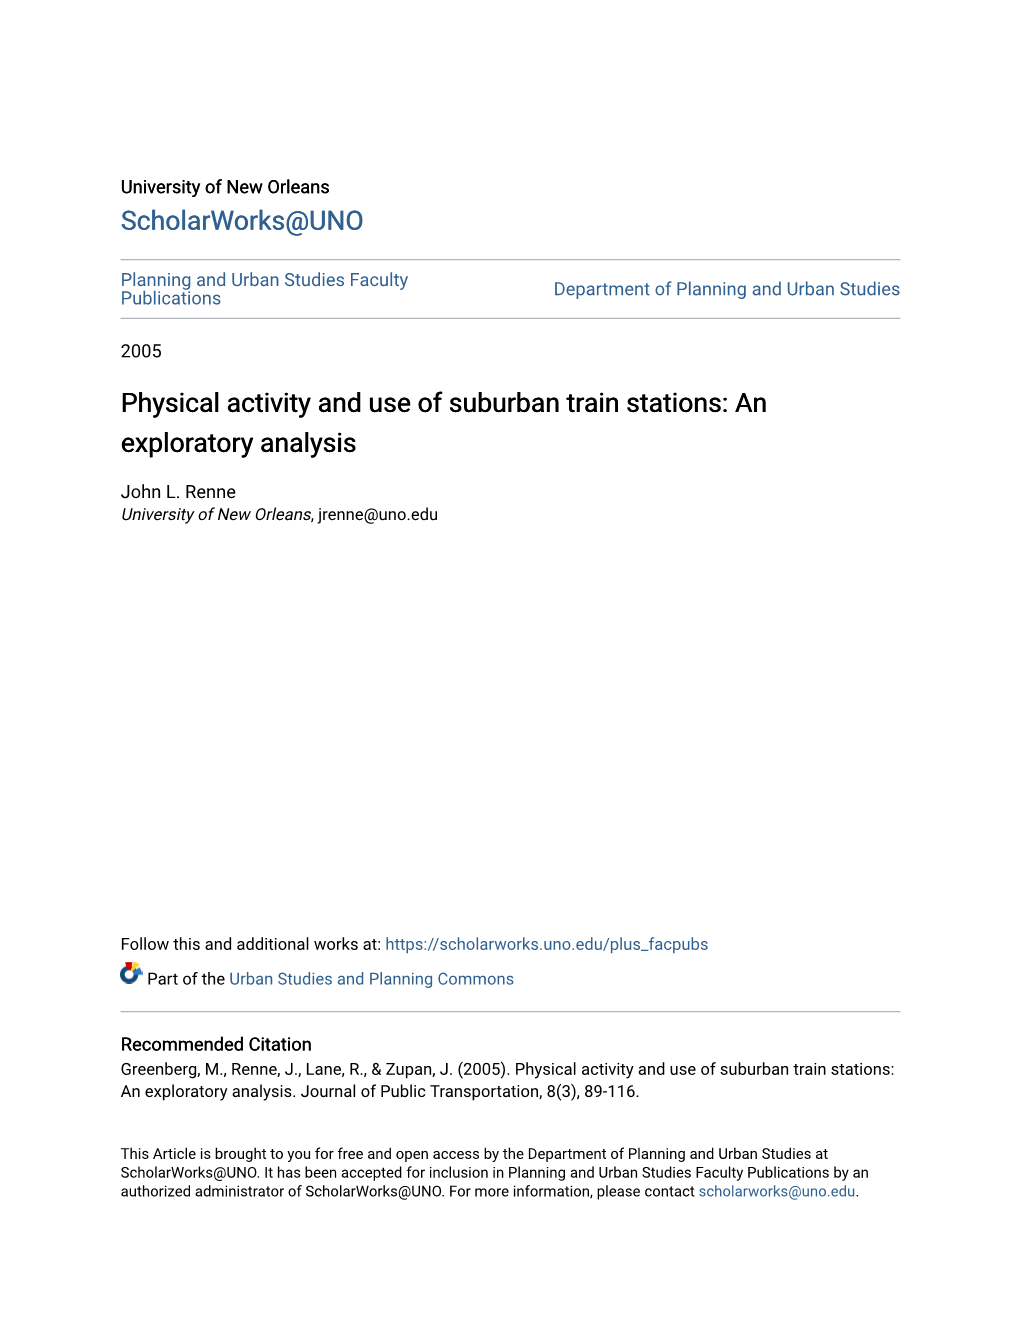 Physical Activity and Use of Suburban Train Stations: an Exploratory Analysis